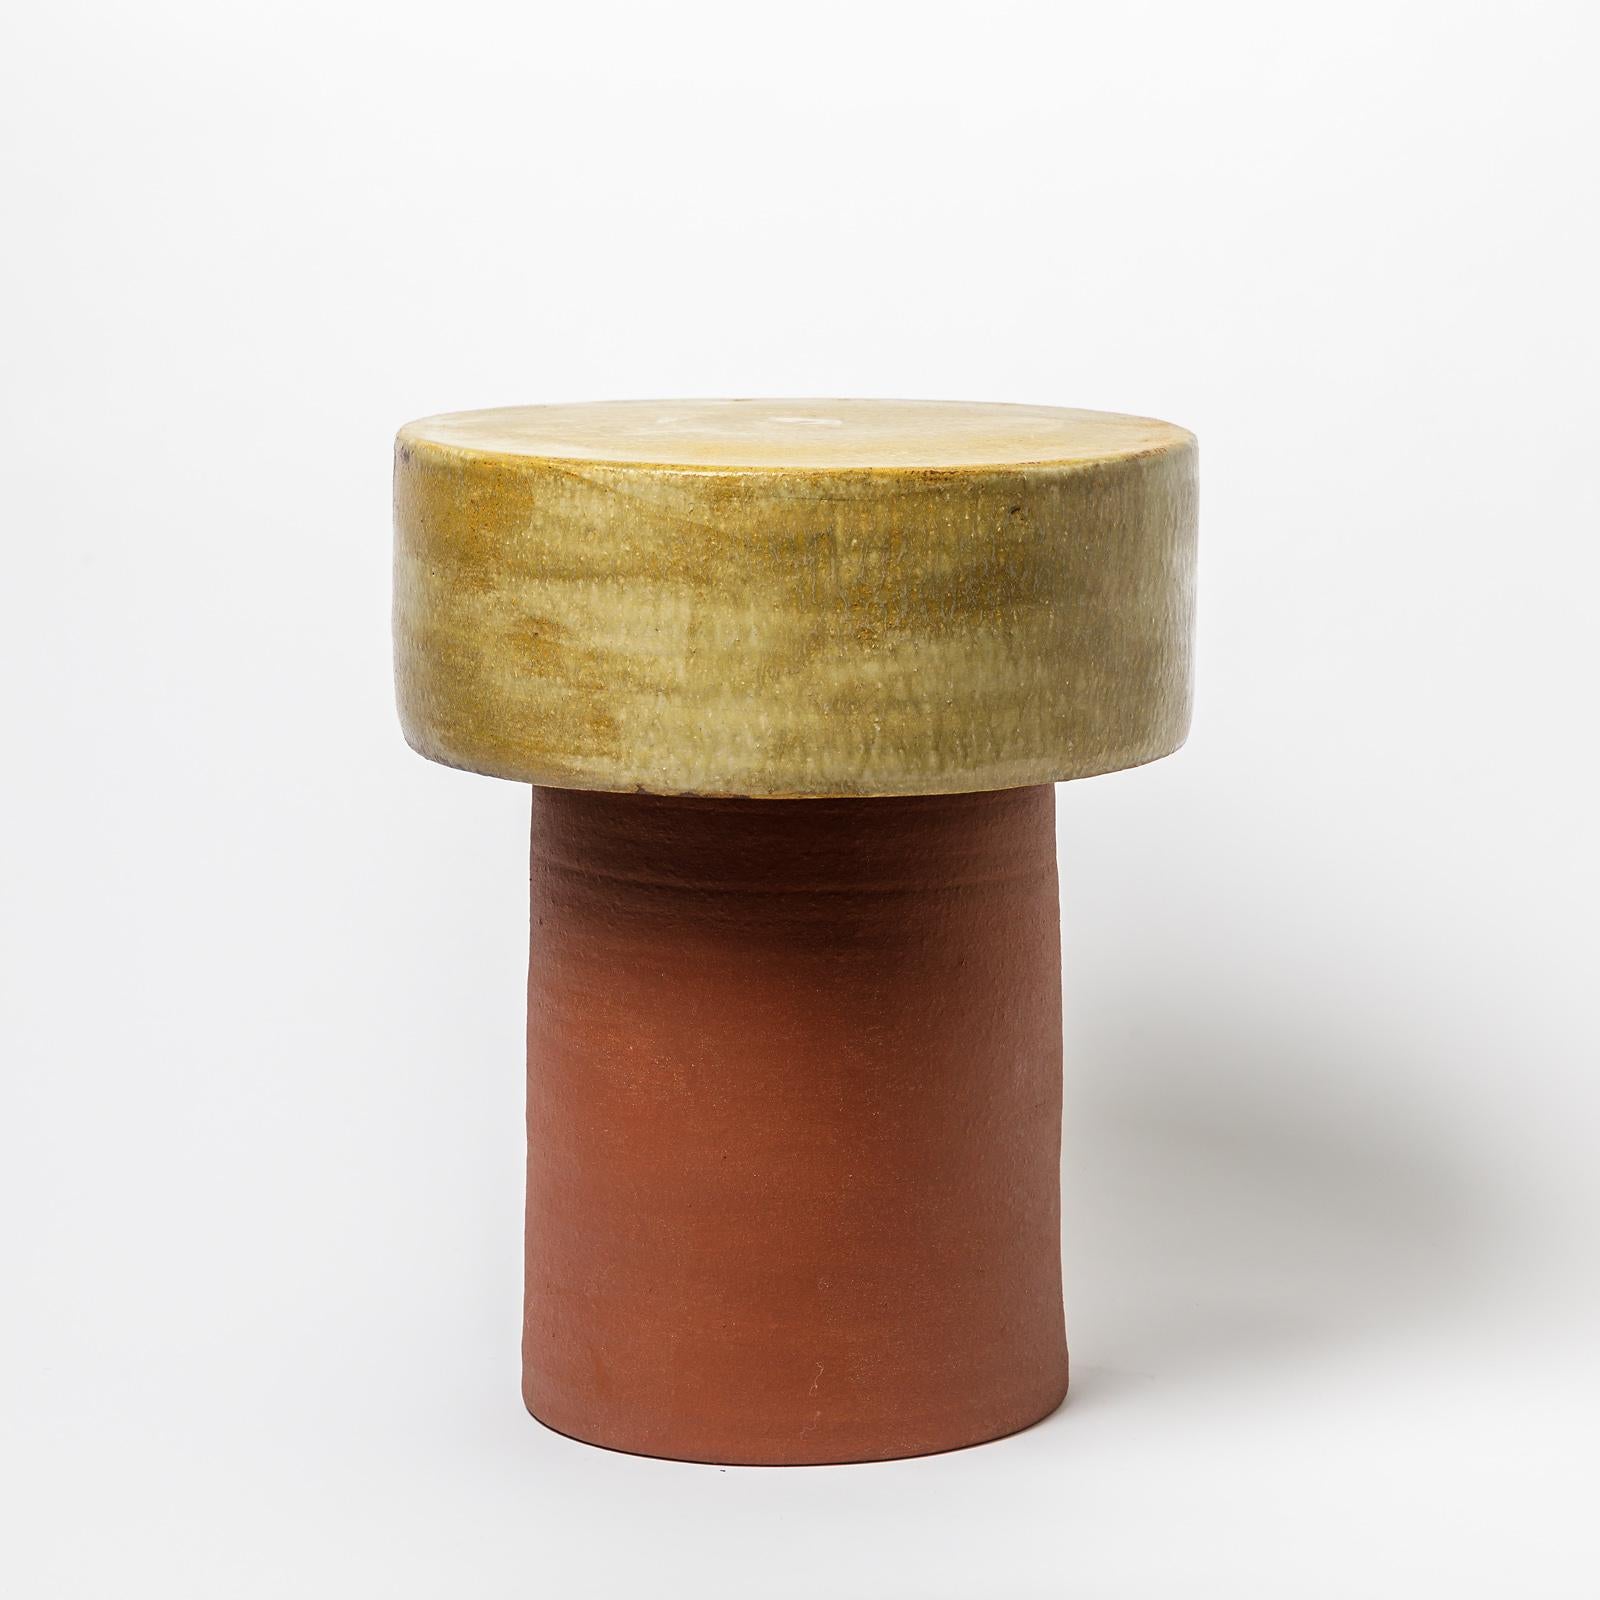 Beaux Arts Ceramic Stool or Table with Glazes Decoration by Mia Jensen, circa 2021